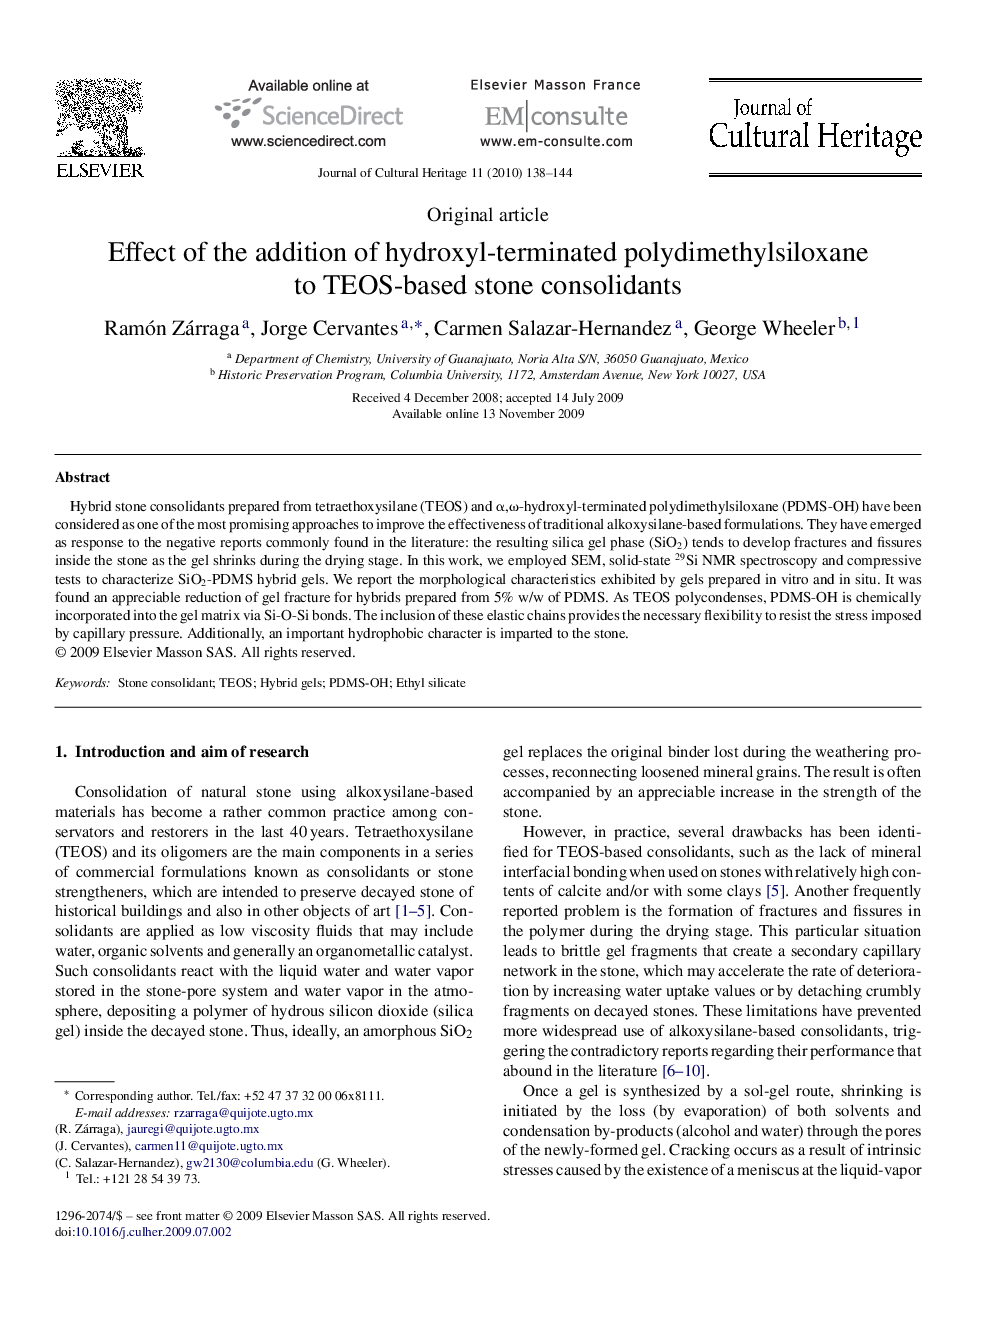 Effect of the addition of hydroxyl-terminated polydimethylsiloxane to TEOS-based stone consolidants